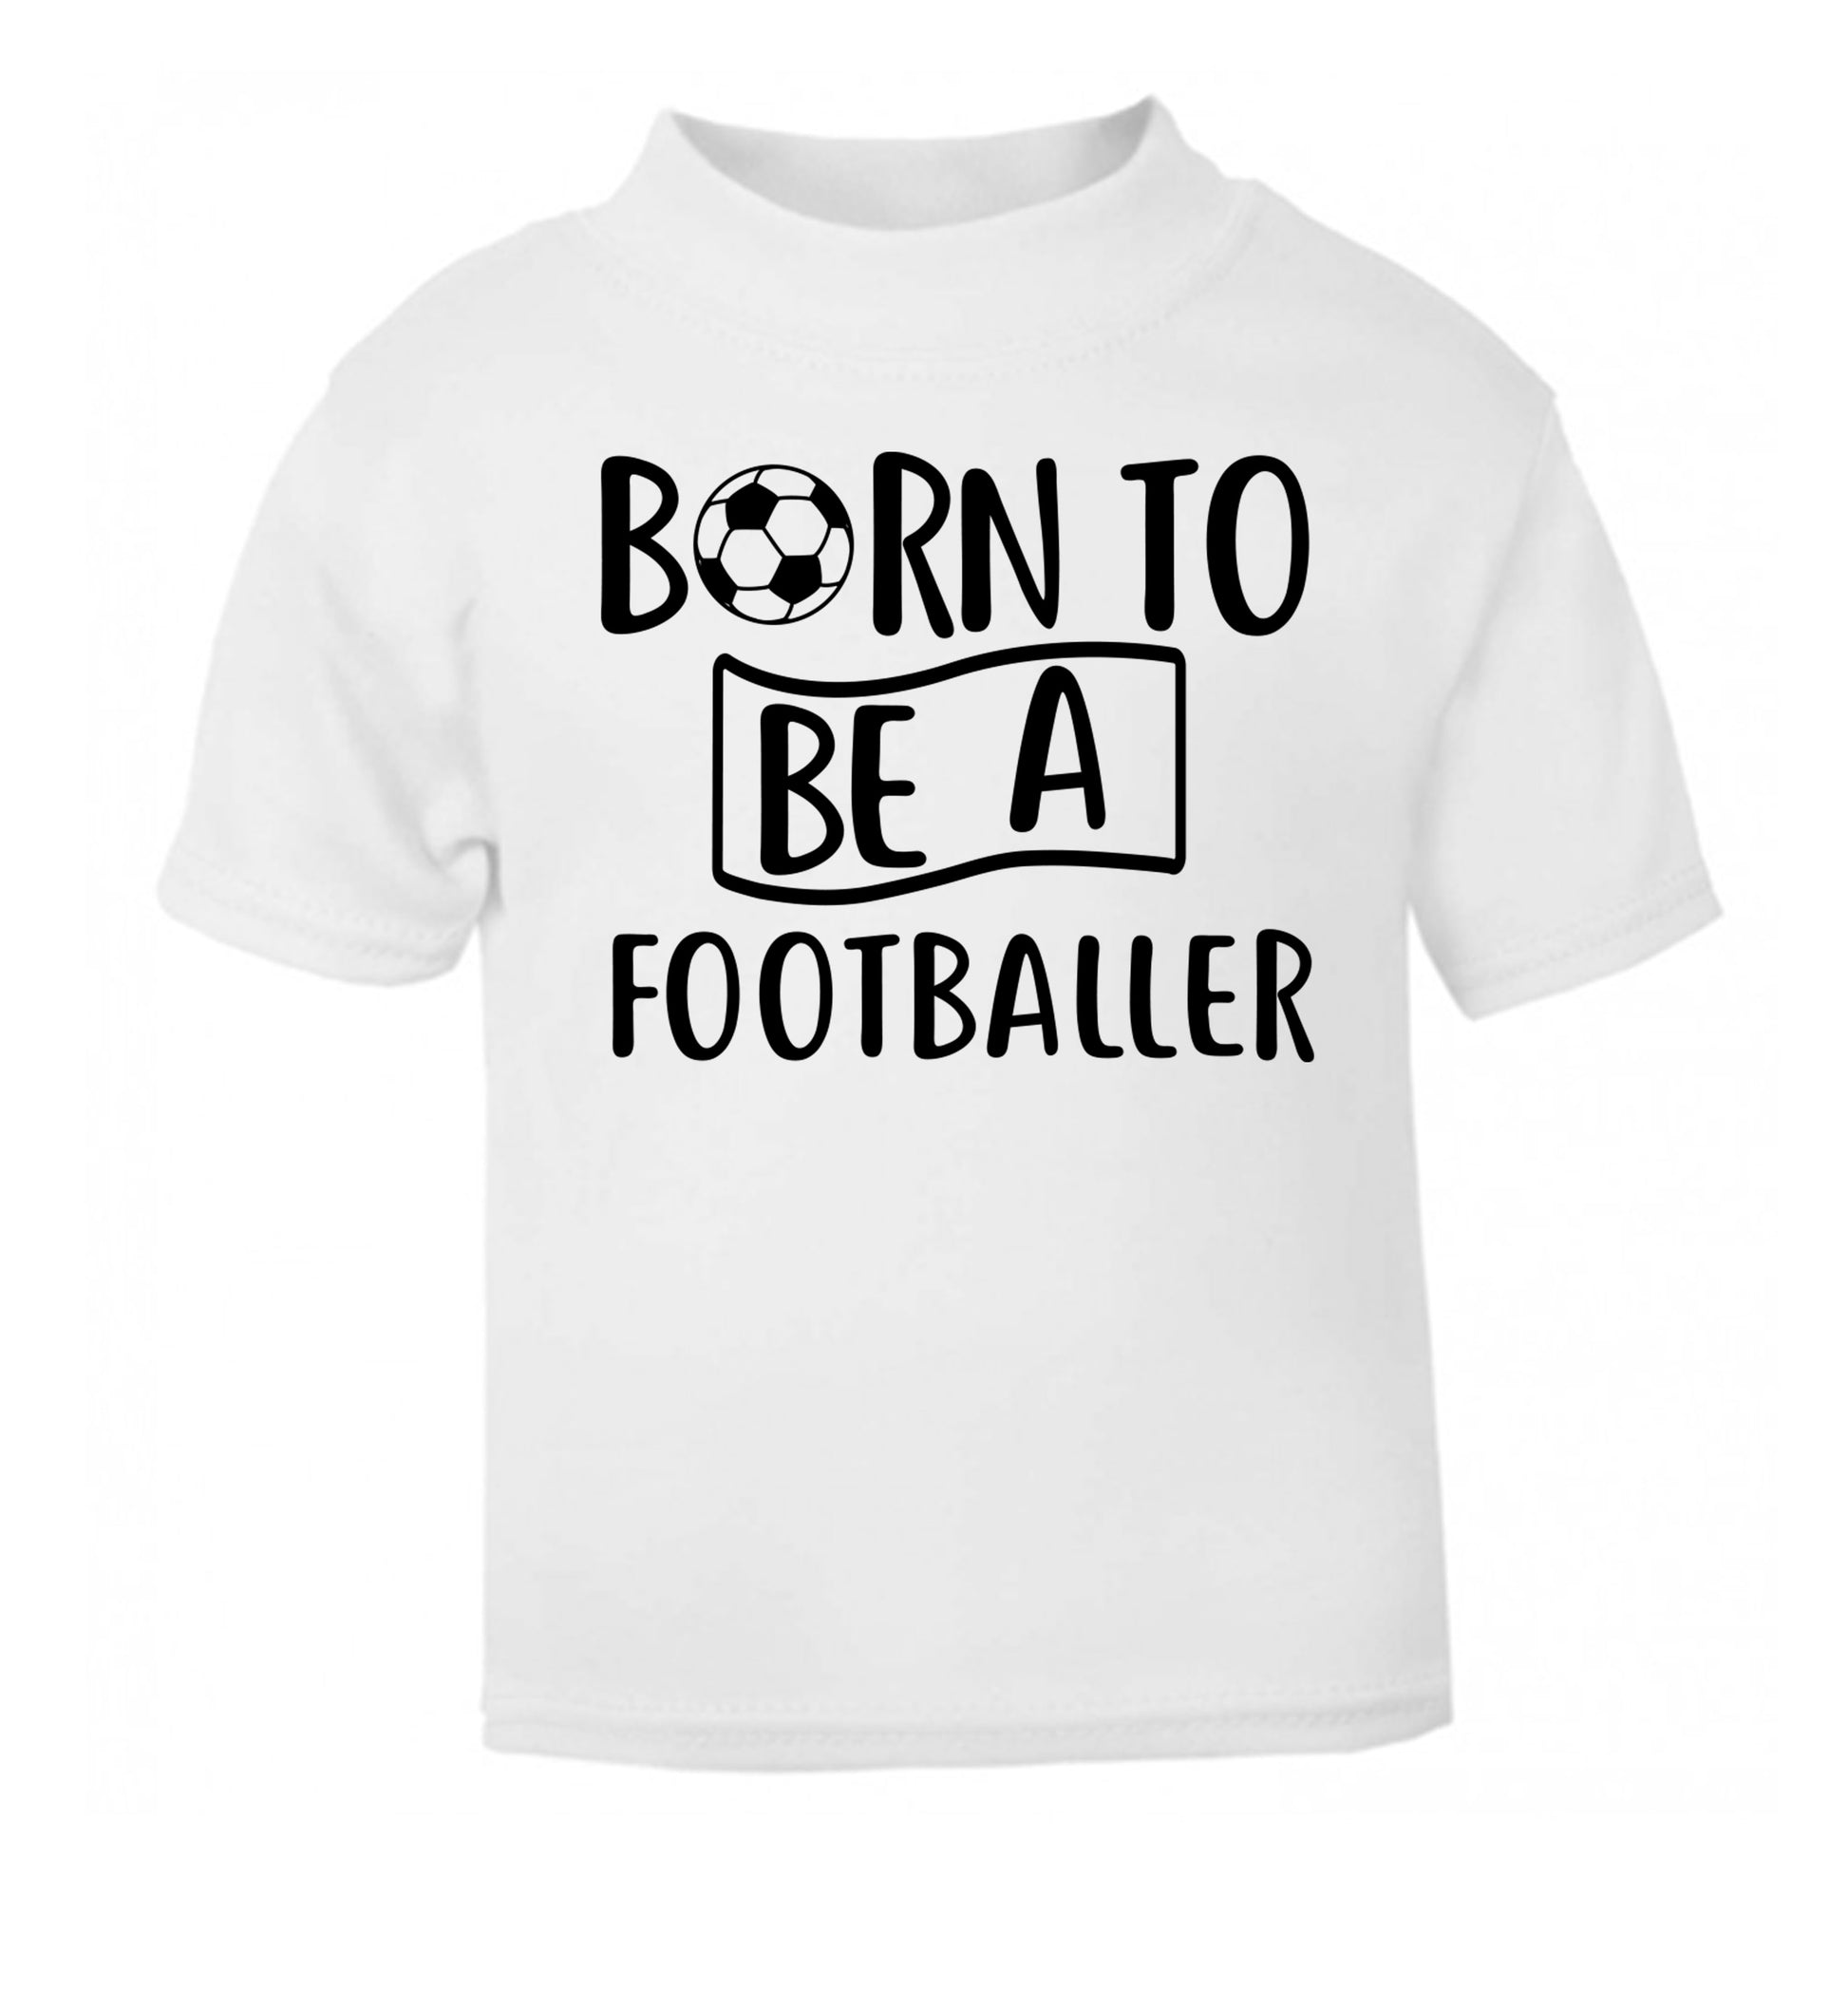 Born to be a footballer white Baby Toddler Tshirt 2 Years